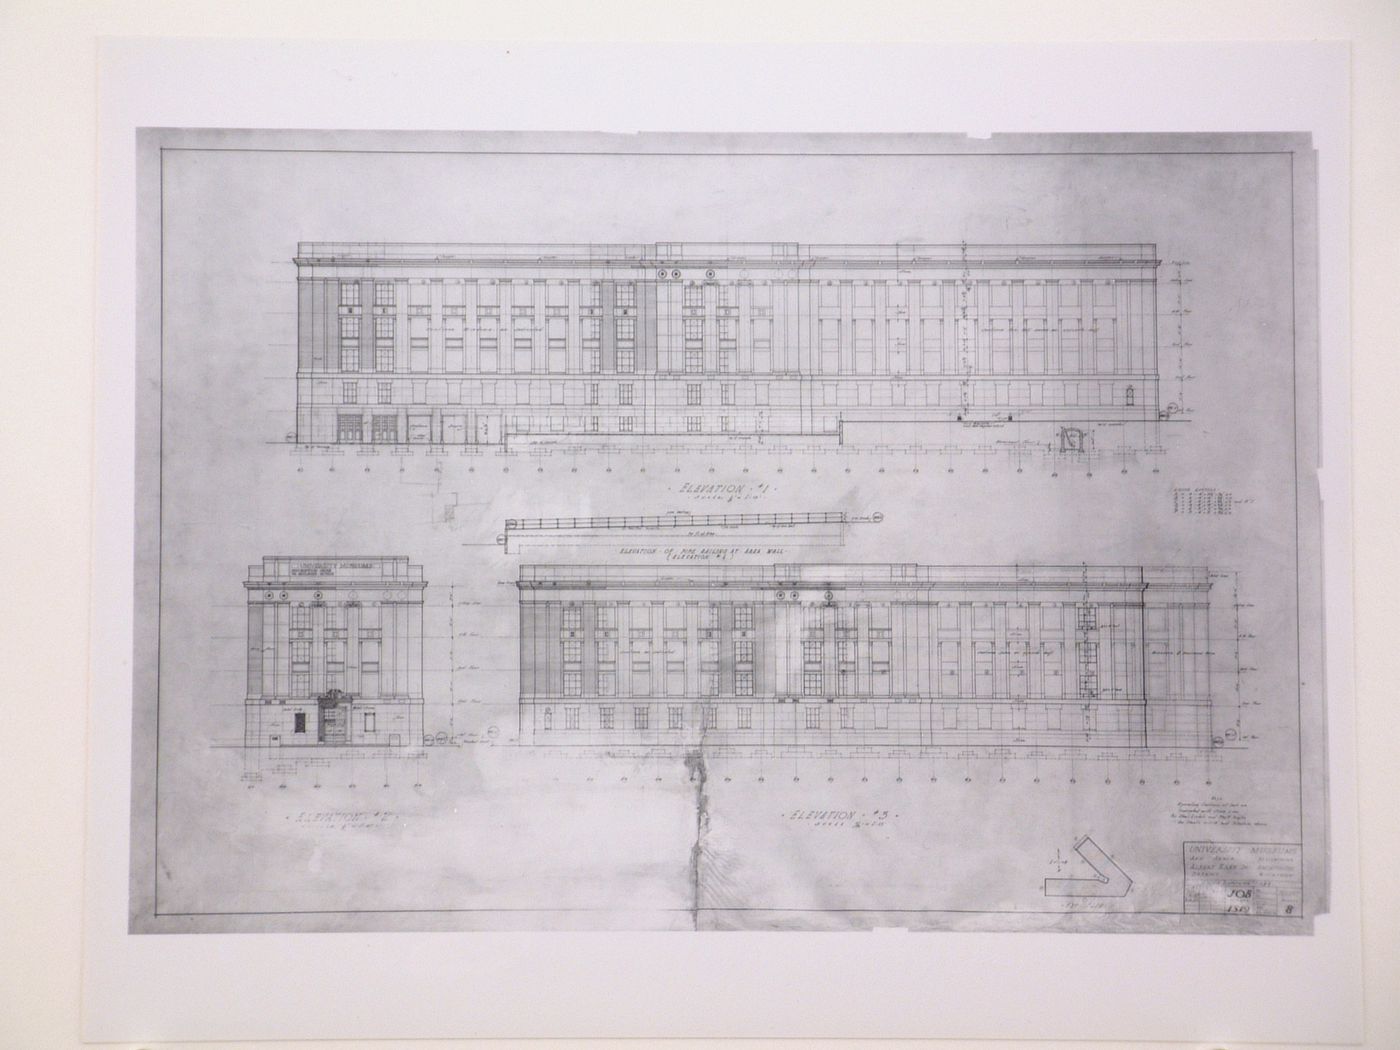 Photograph of elevations for the Alexander G. Ruthven Museums Building, North University Avenue, University of Michigan, Ann Arbor, Michigan